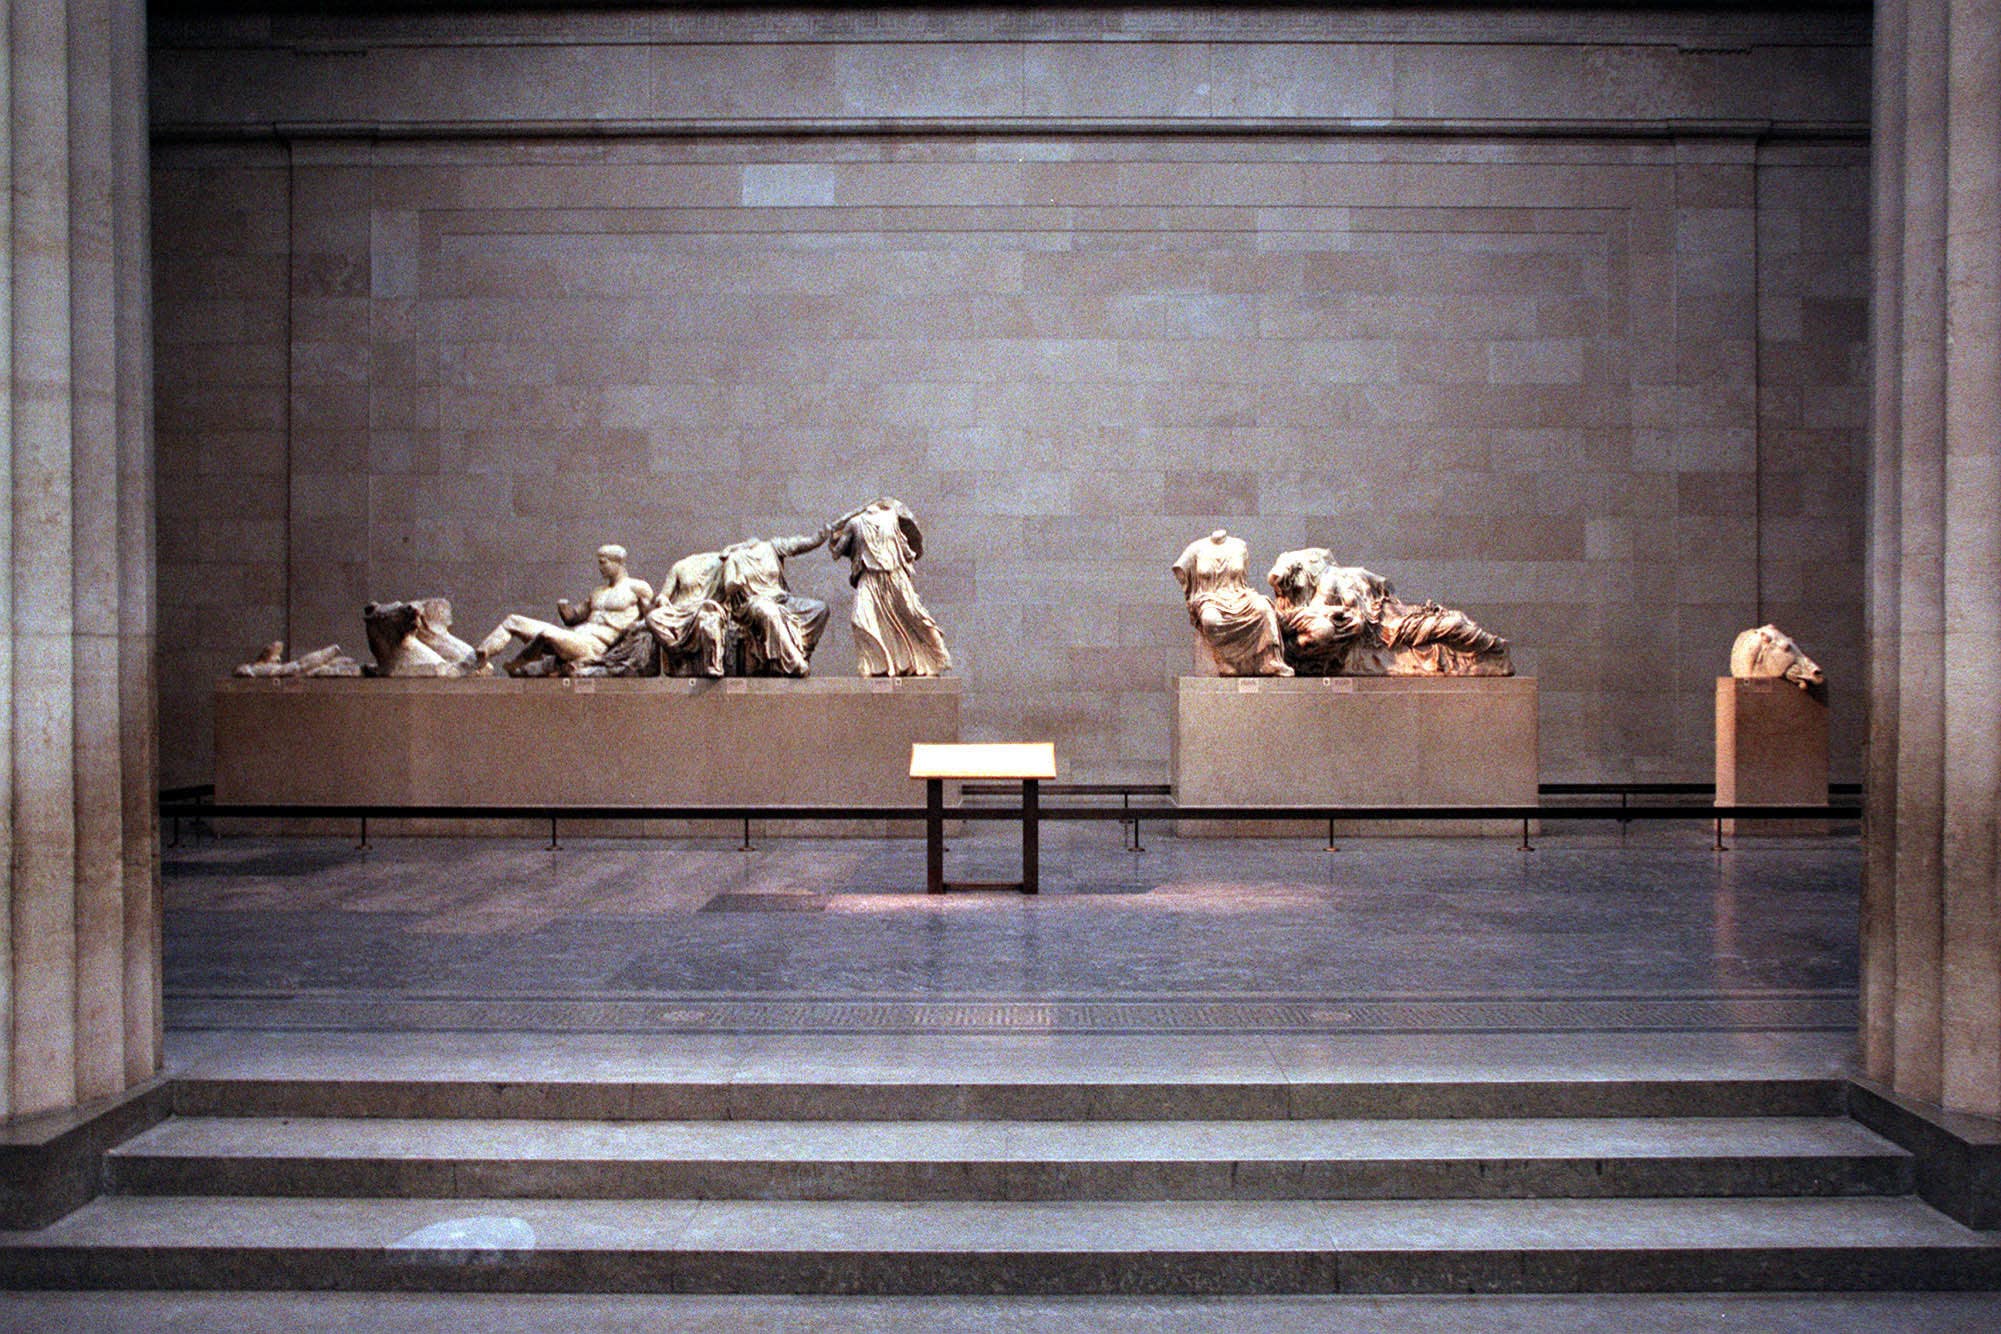 The Parthenon Sculptures, also known as the Elgin Marbles, at the British Museum in London